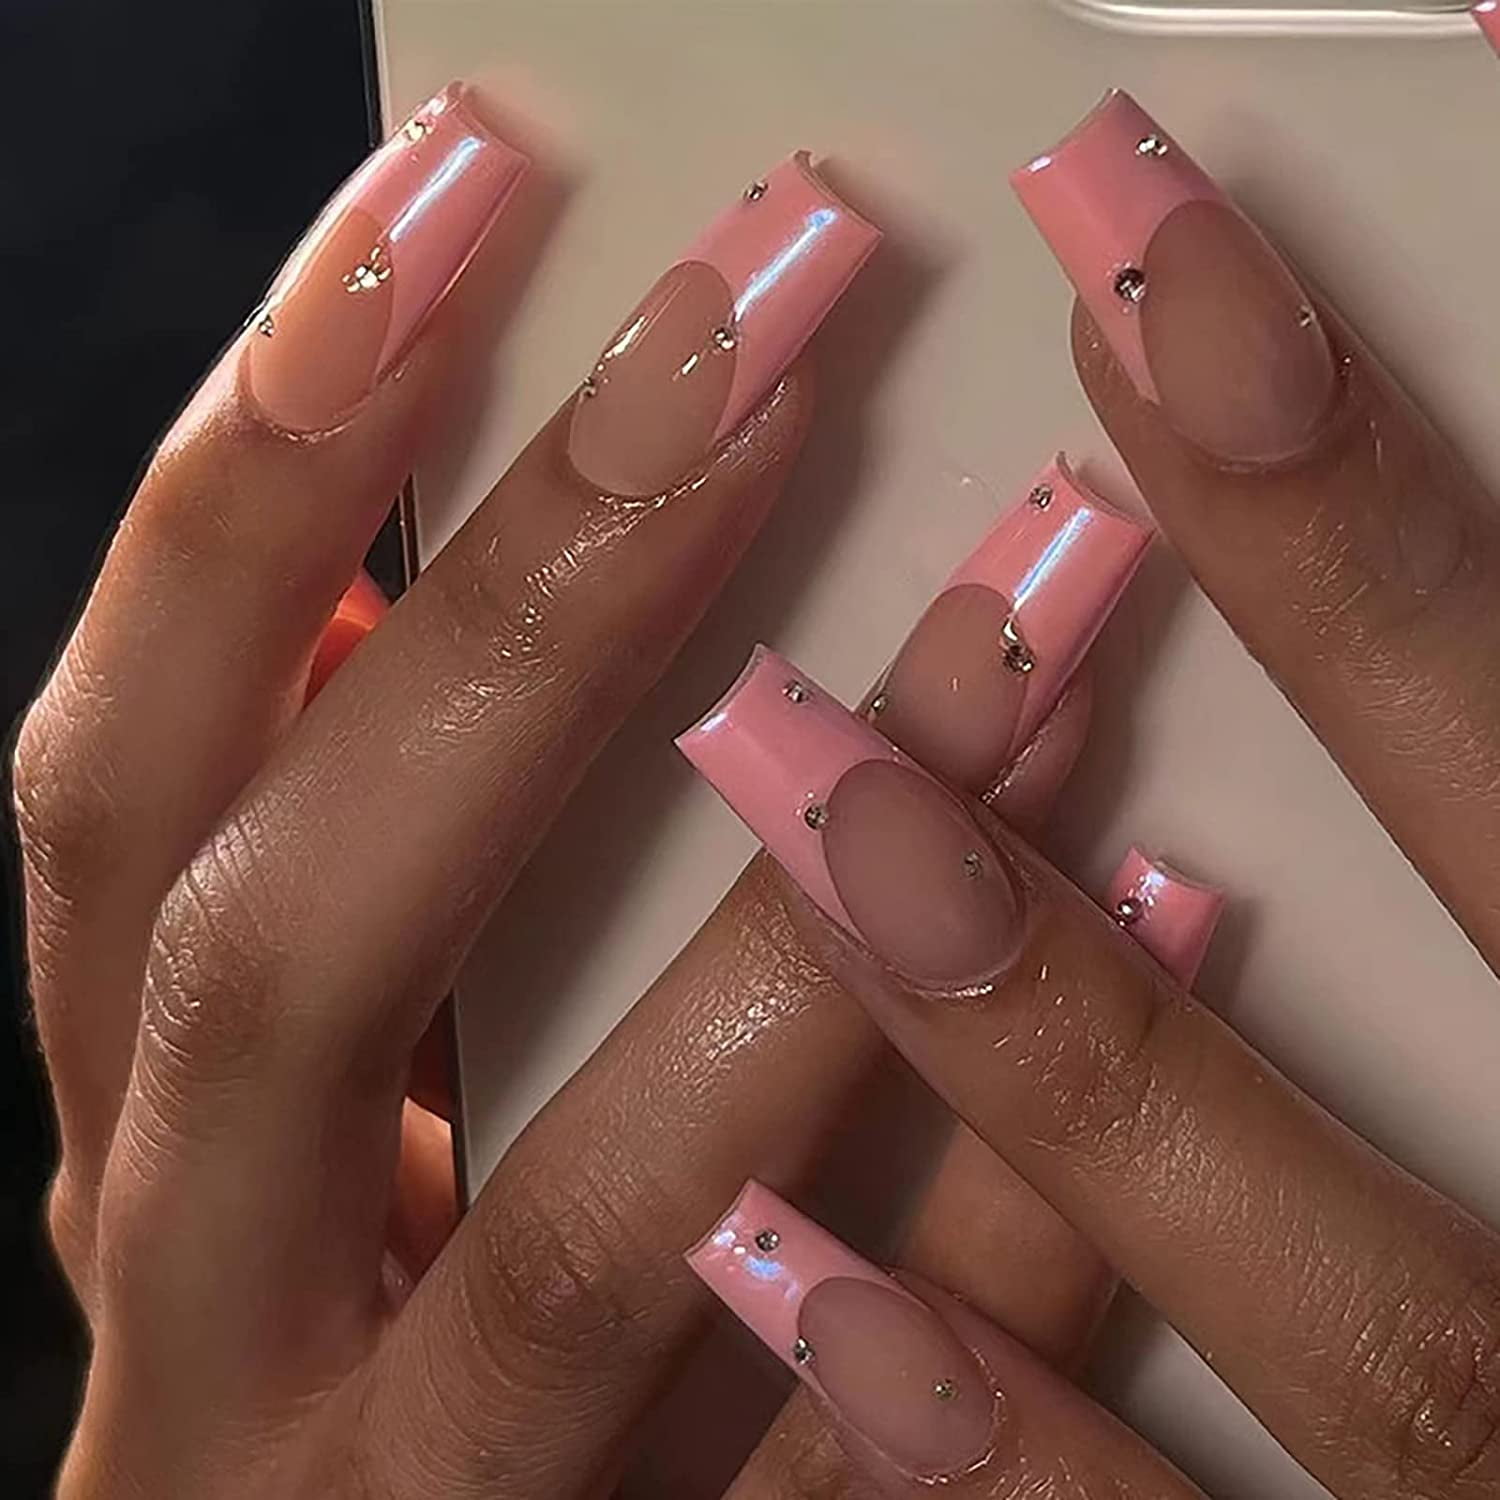 Pink & White Long Ombre Coffin Press on Nails – Bella Chic Hair & Beauty